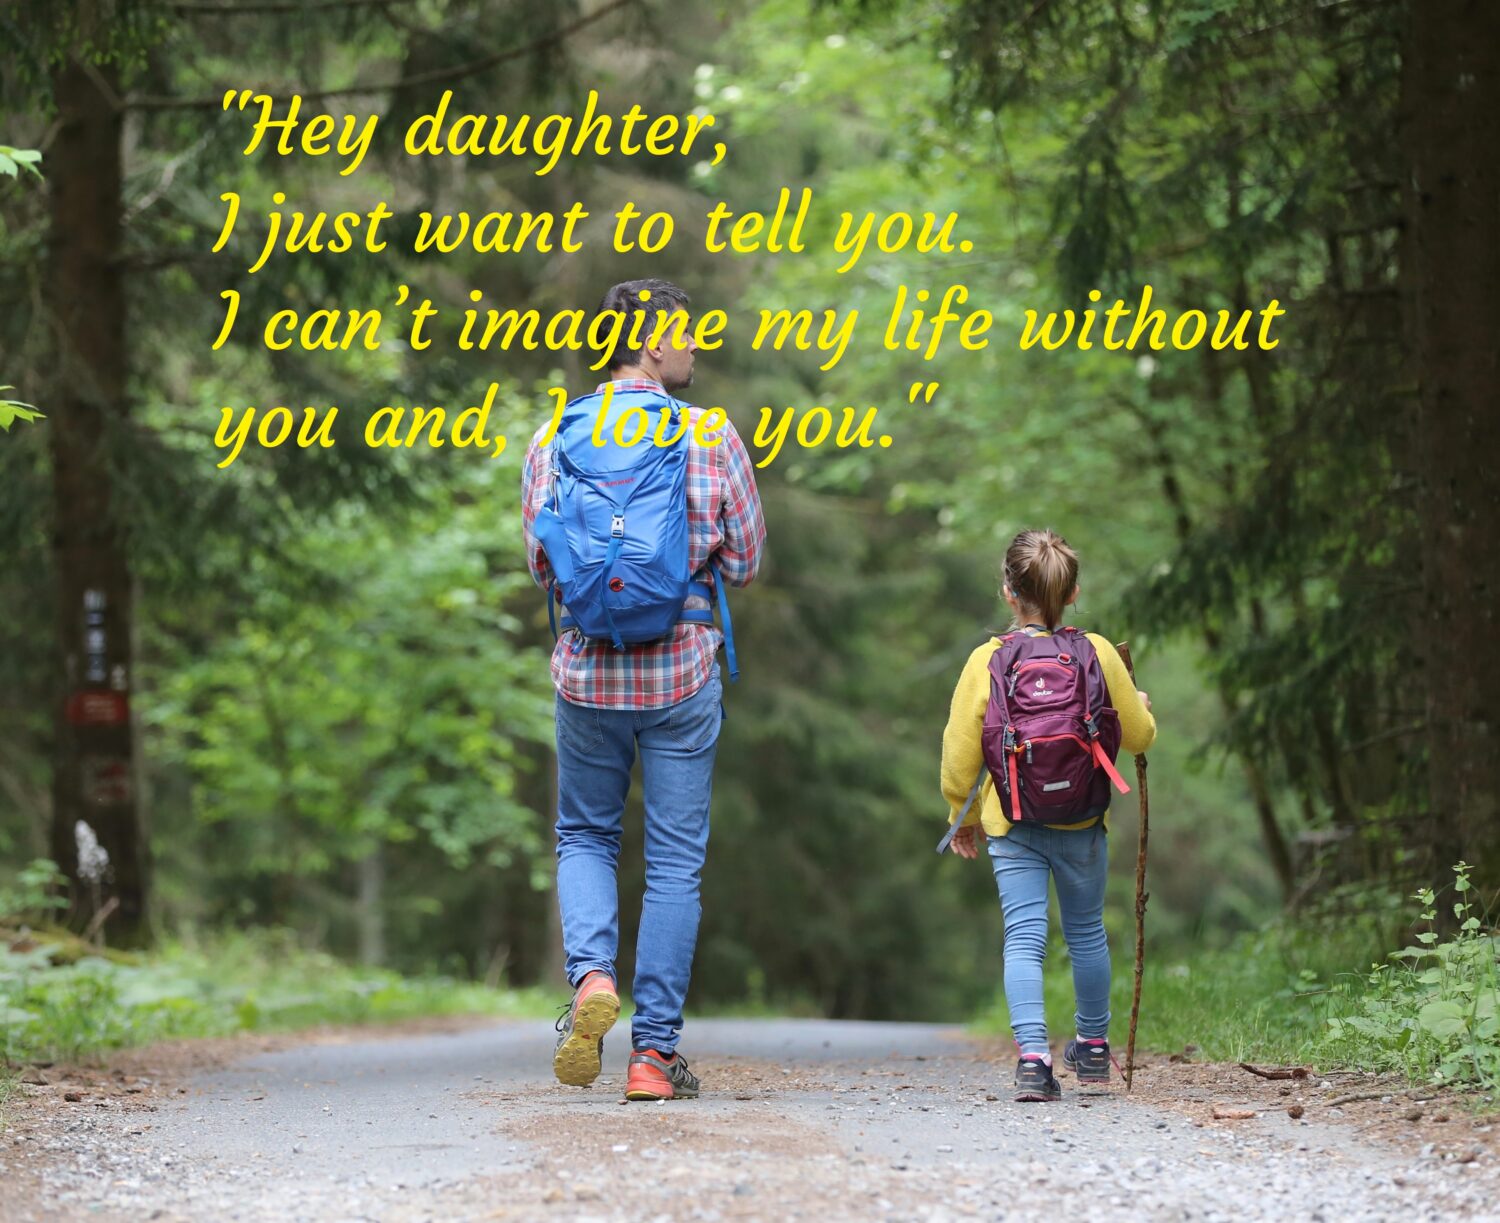 Father and daughter on trekking trip, Daughters quotes.